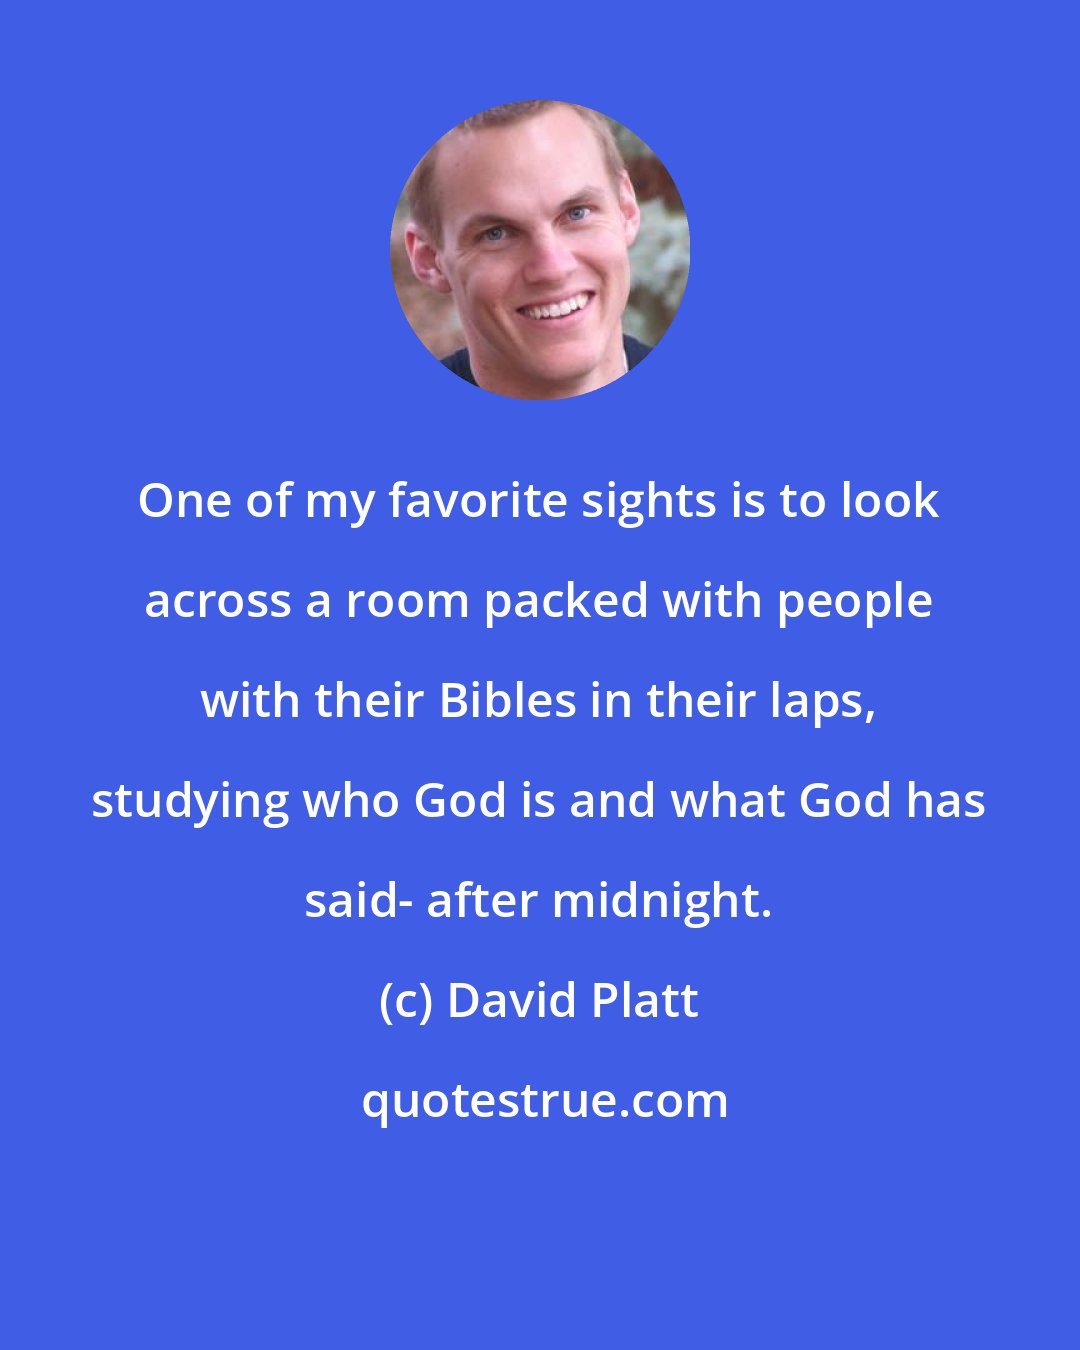 David Platt: One of my favorite sights is to look across a room packed with people with their Bibles in their laps, studying who God is and what God has said- after midnight.